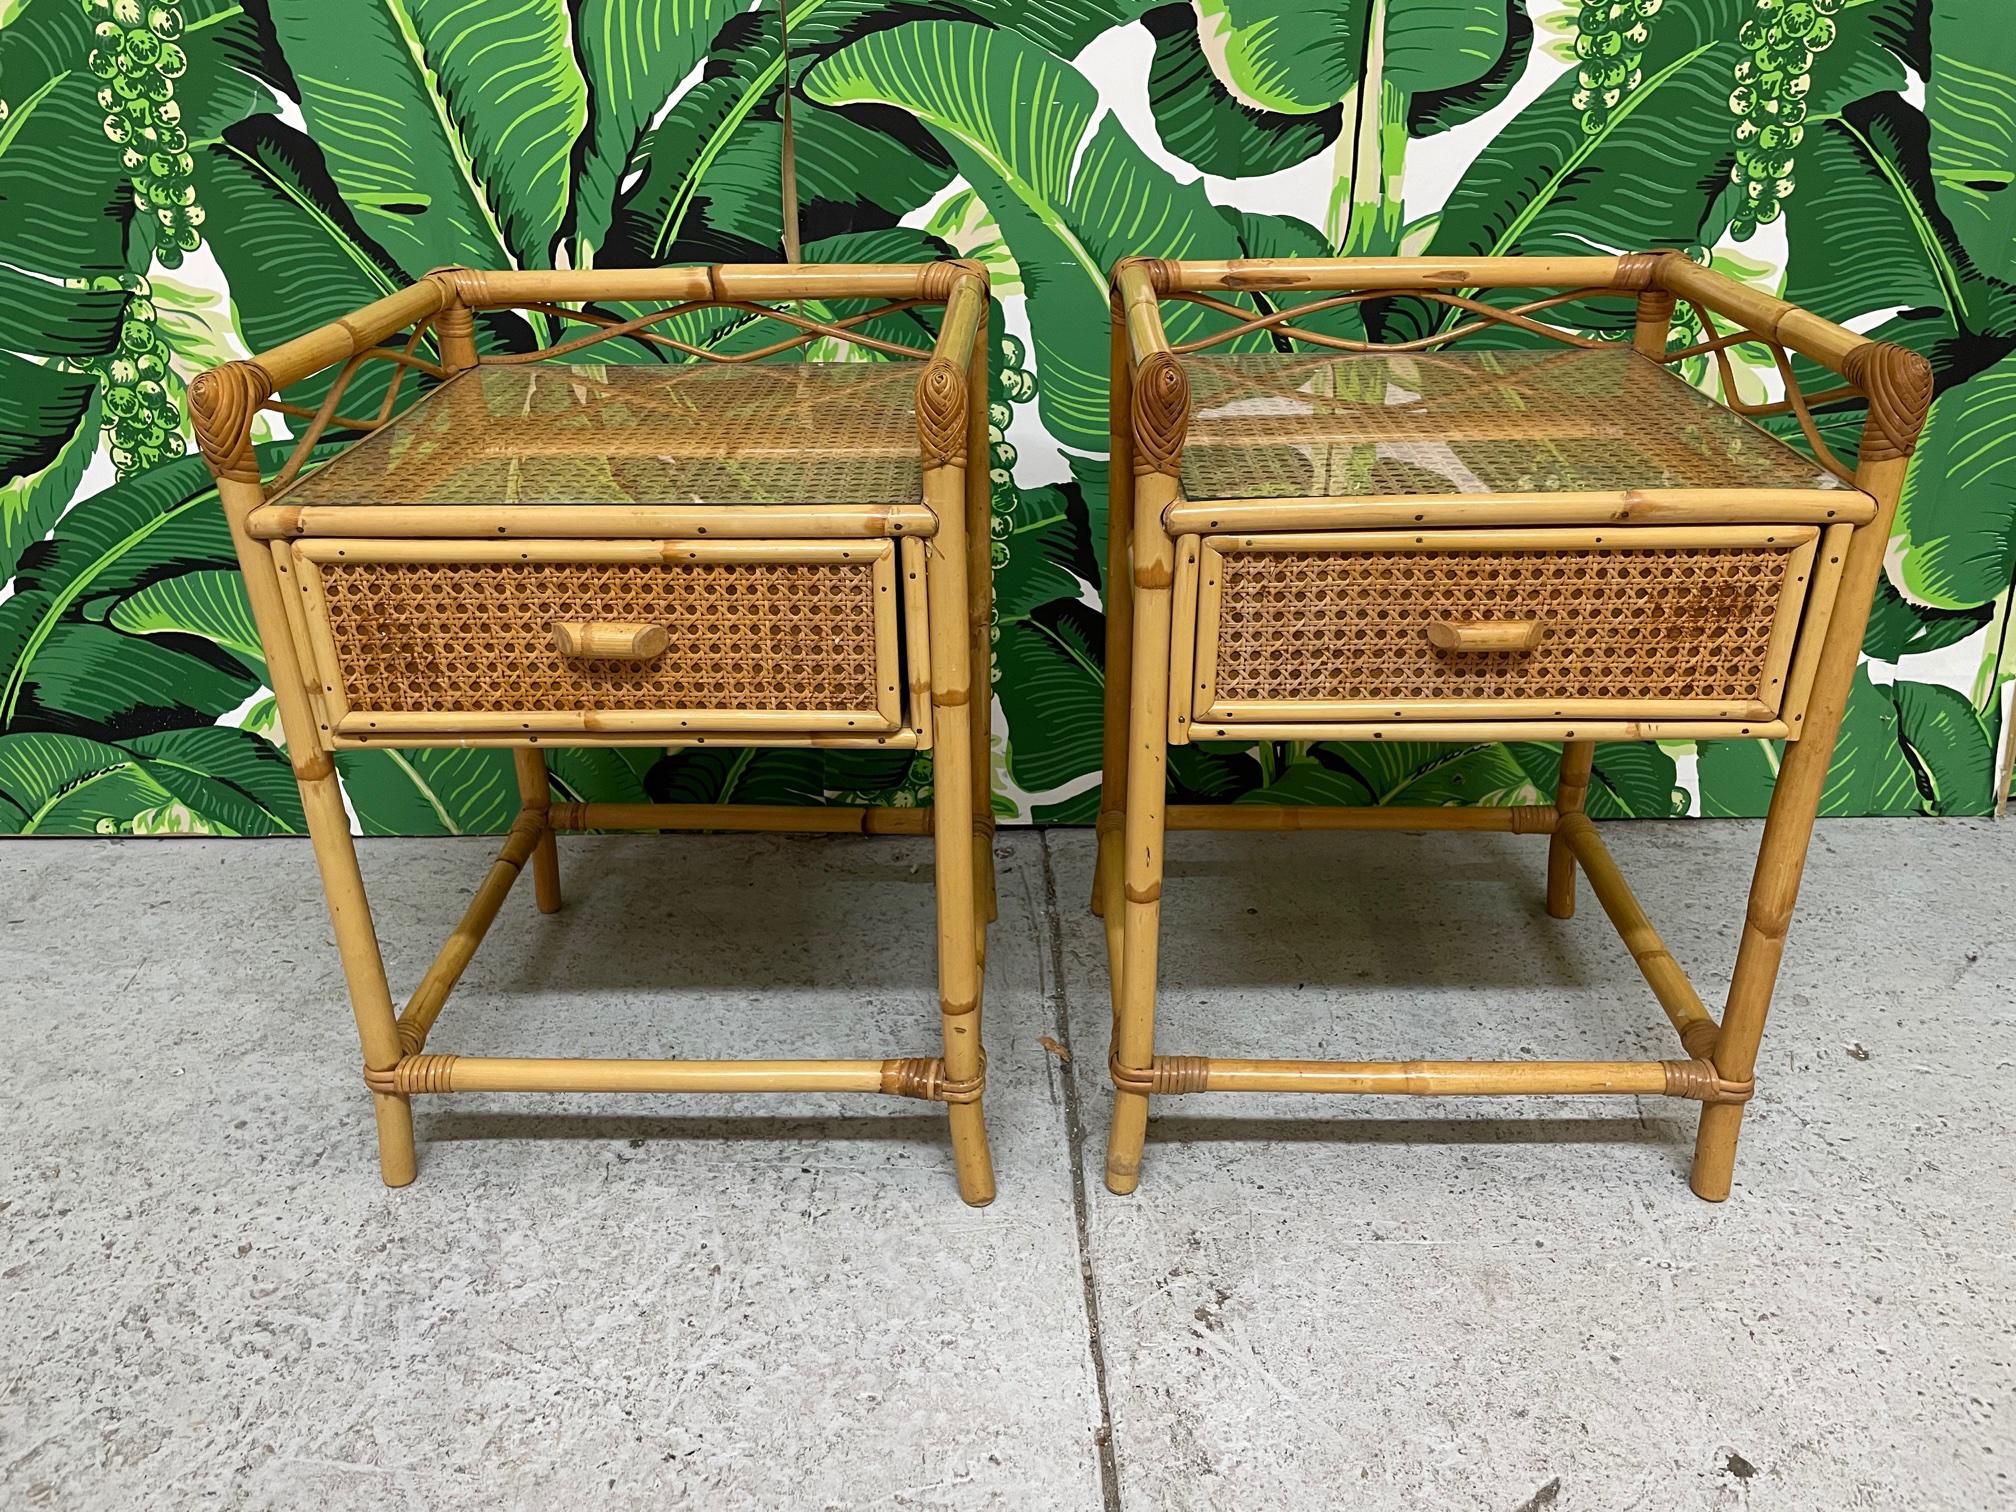 Pair of vintage nightstands feature rattan construction and woven wicker veneer. Removable glass tops. Very good condition with minor imperfections consistent with age. We also have a matching mirror, dresser, and vanity.
Shipping to most of the